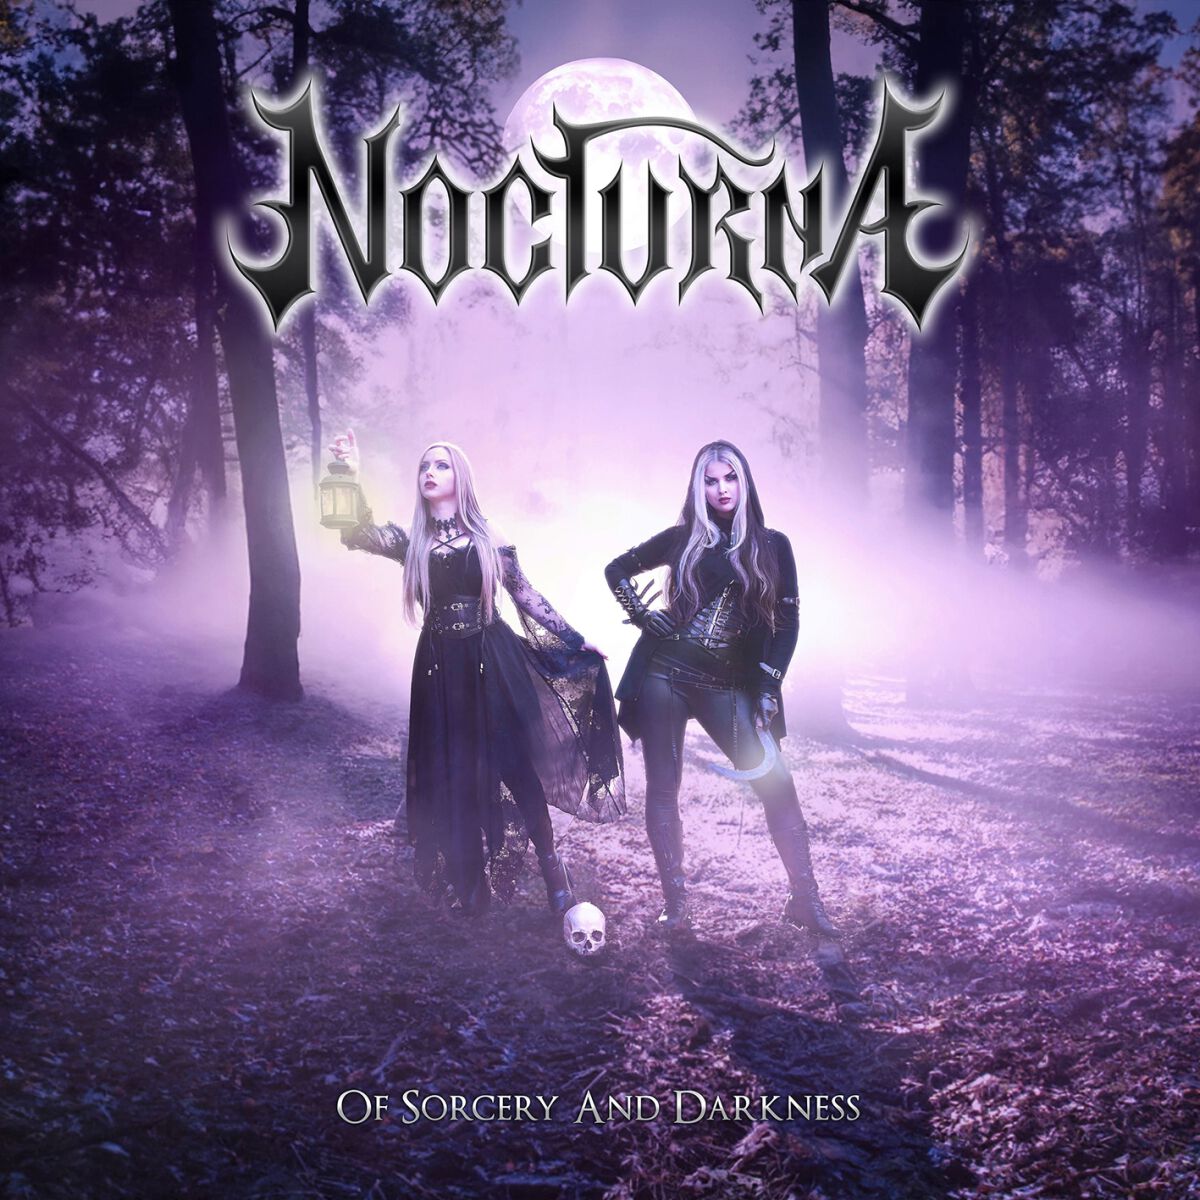 Nocturna Of sorcery and darkness CD multicolor